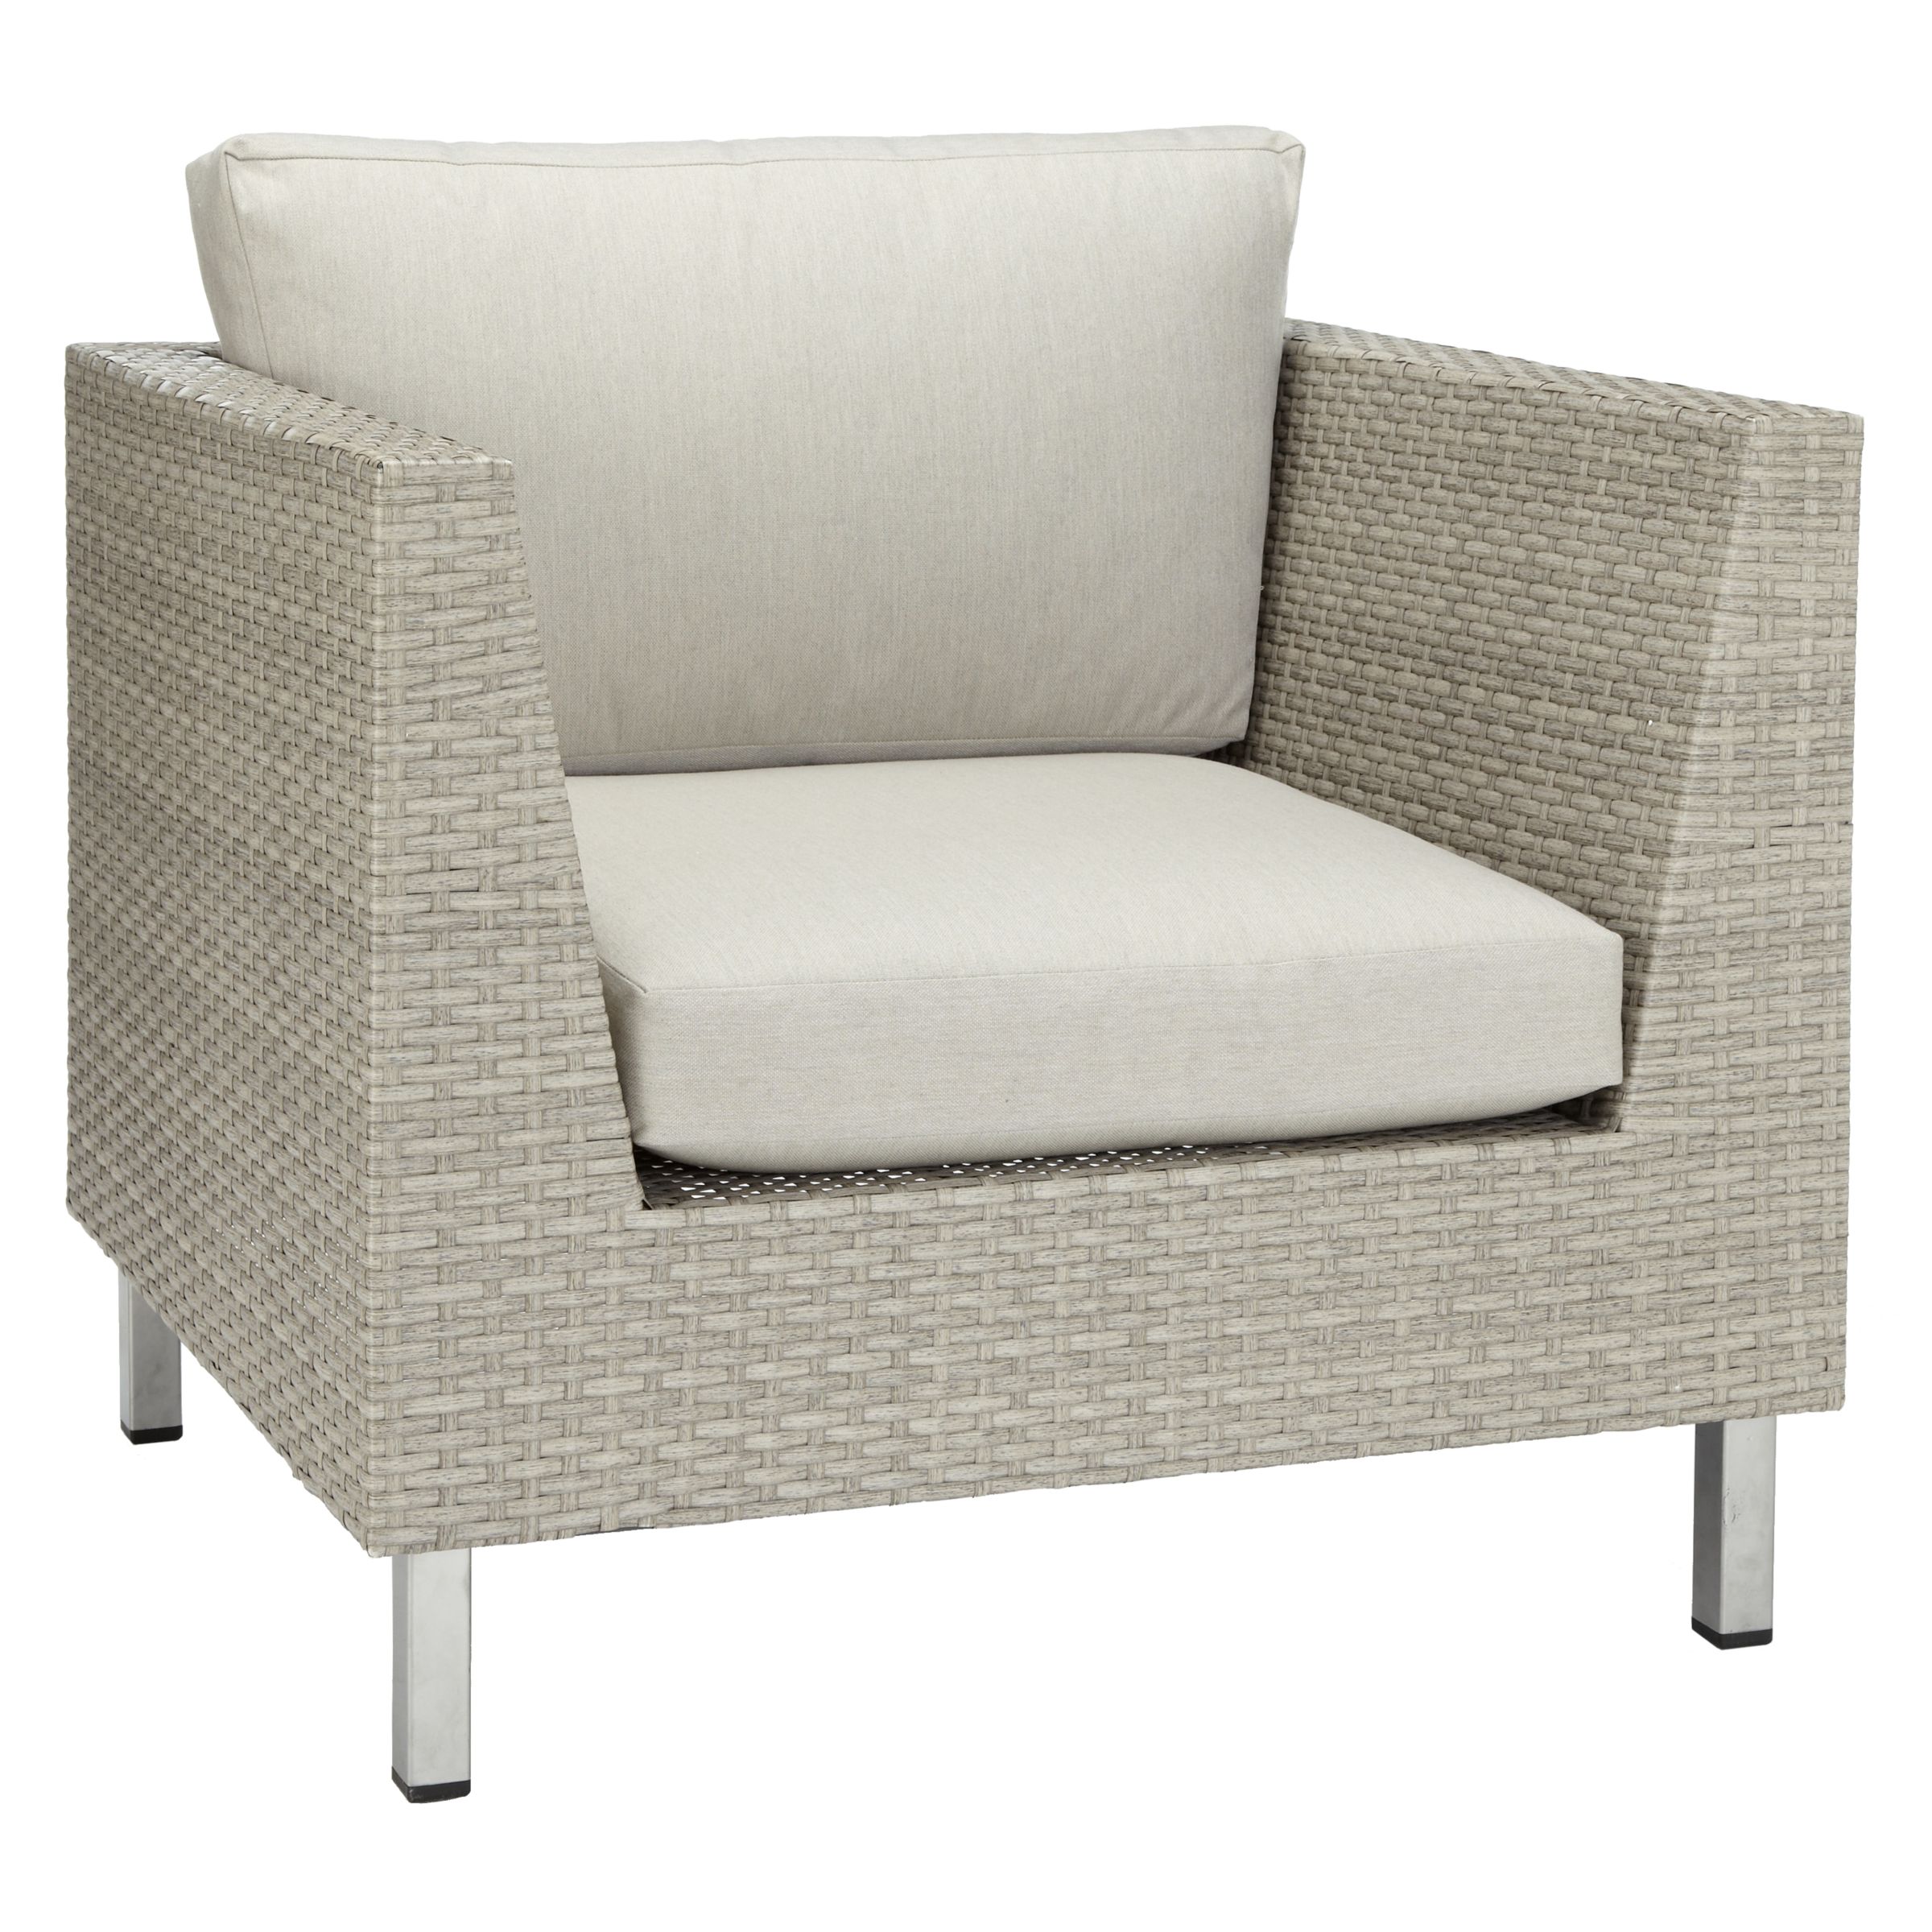 John Lewis & Partners Madrid Outdoor Lounging Armchair